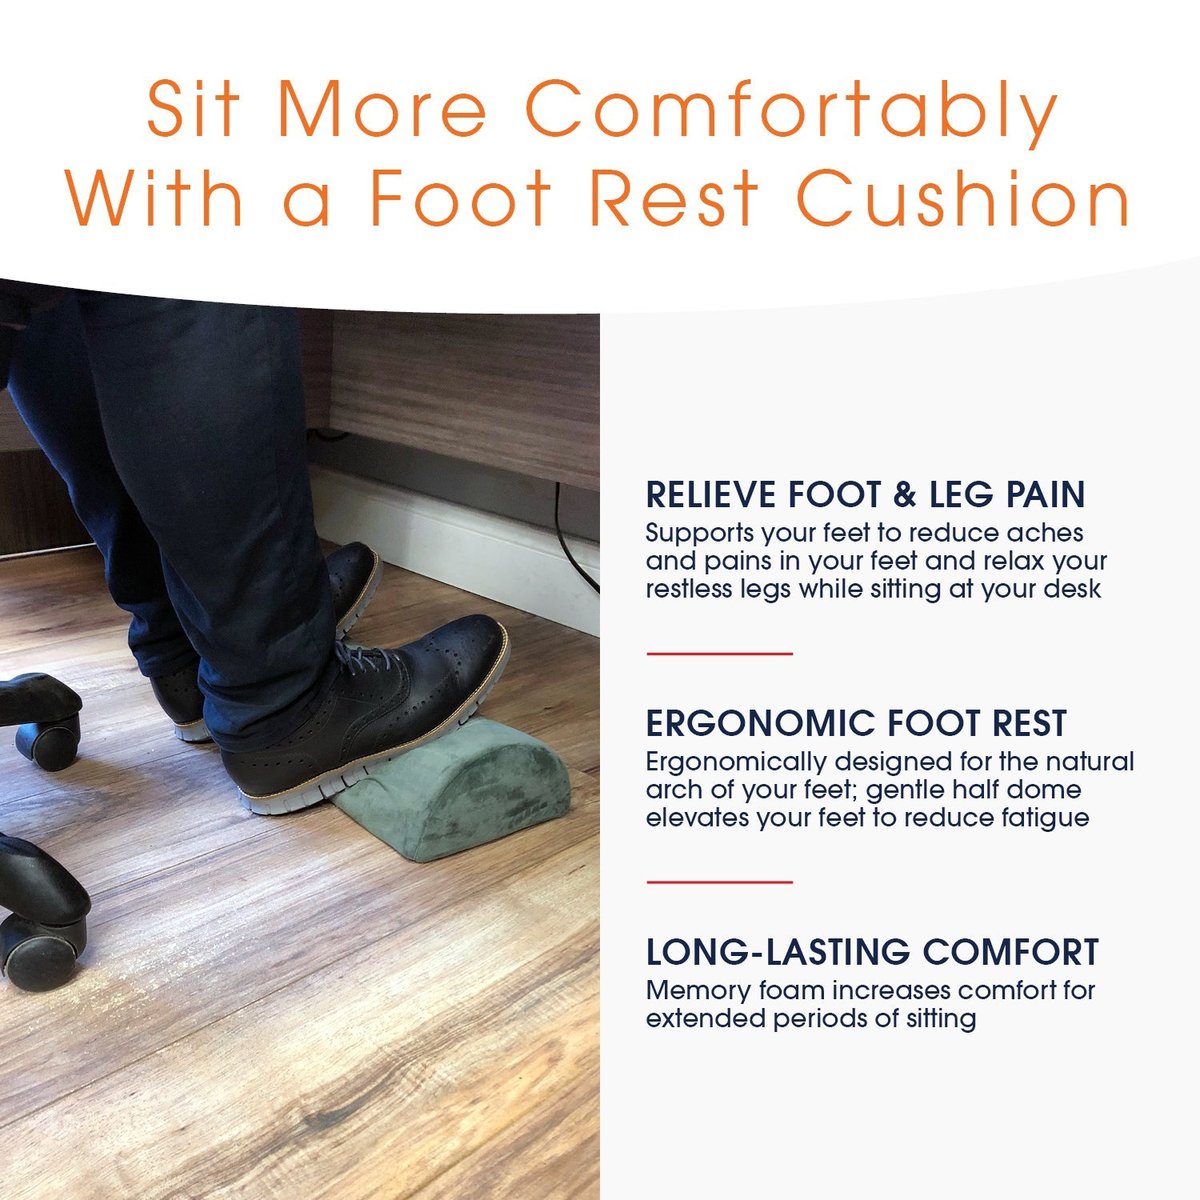 https://images.verishop.com/cheer-collection-foot-rest-cushion-under-desk-memory-foam-pillow-for-sore-feet/M00723169677271-714180735?auto=format&cs=strip&fit=max&w=1200